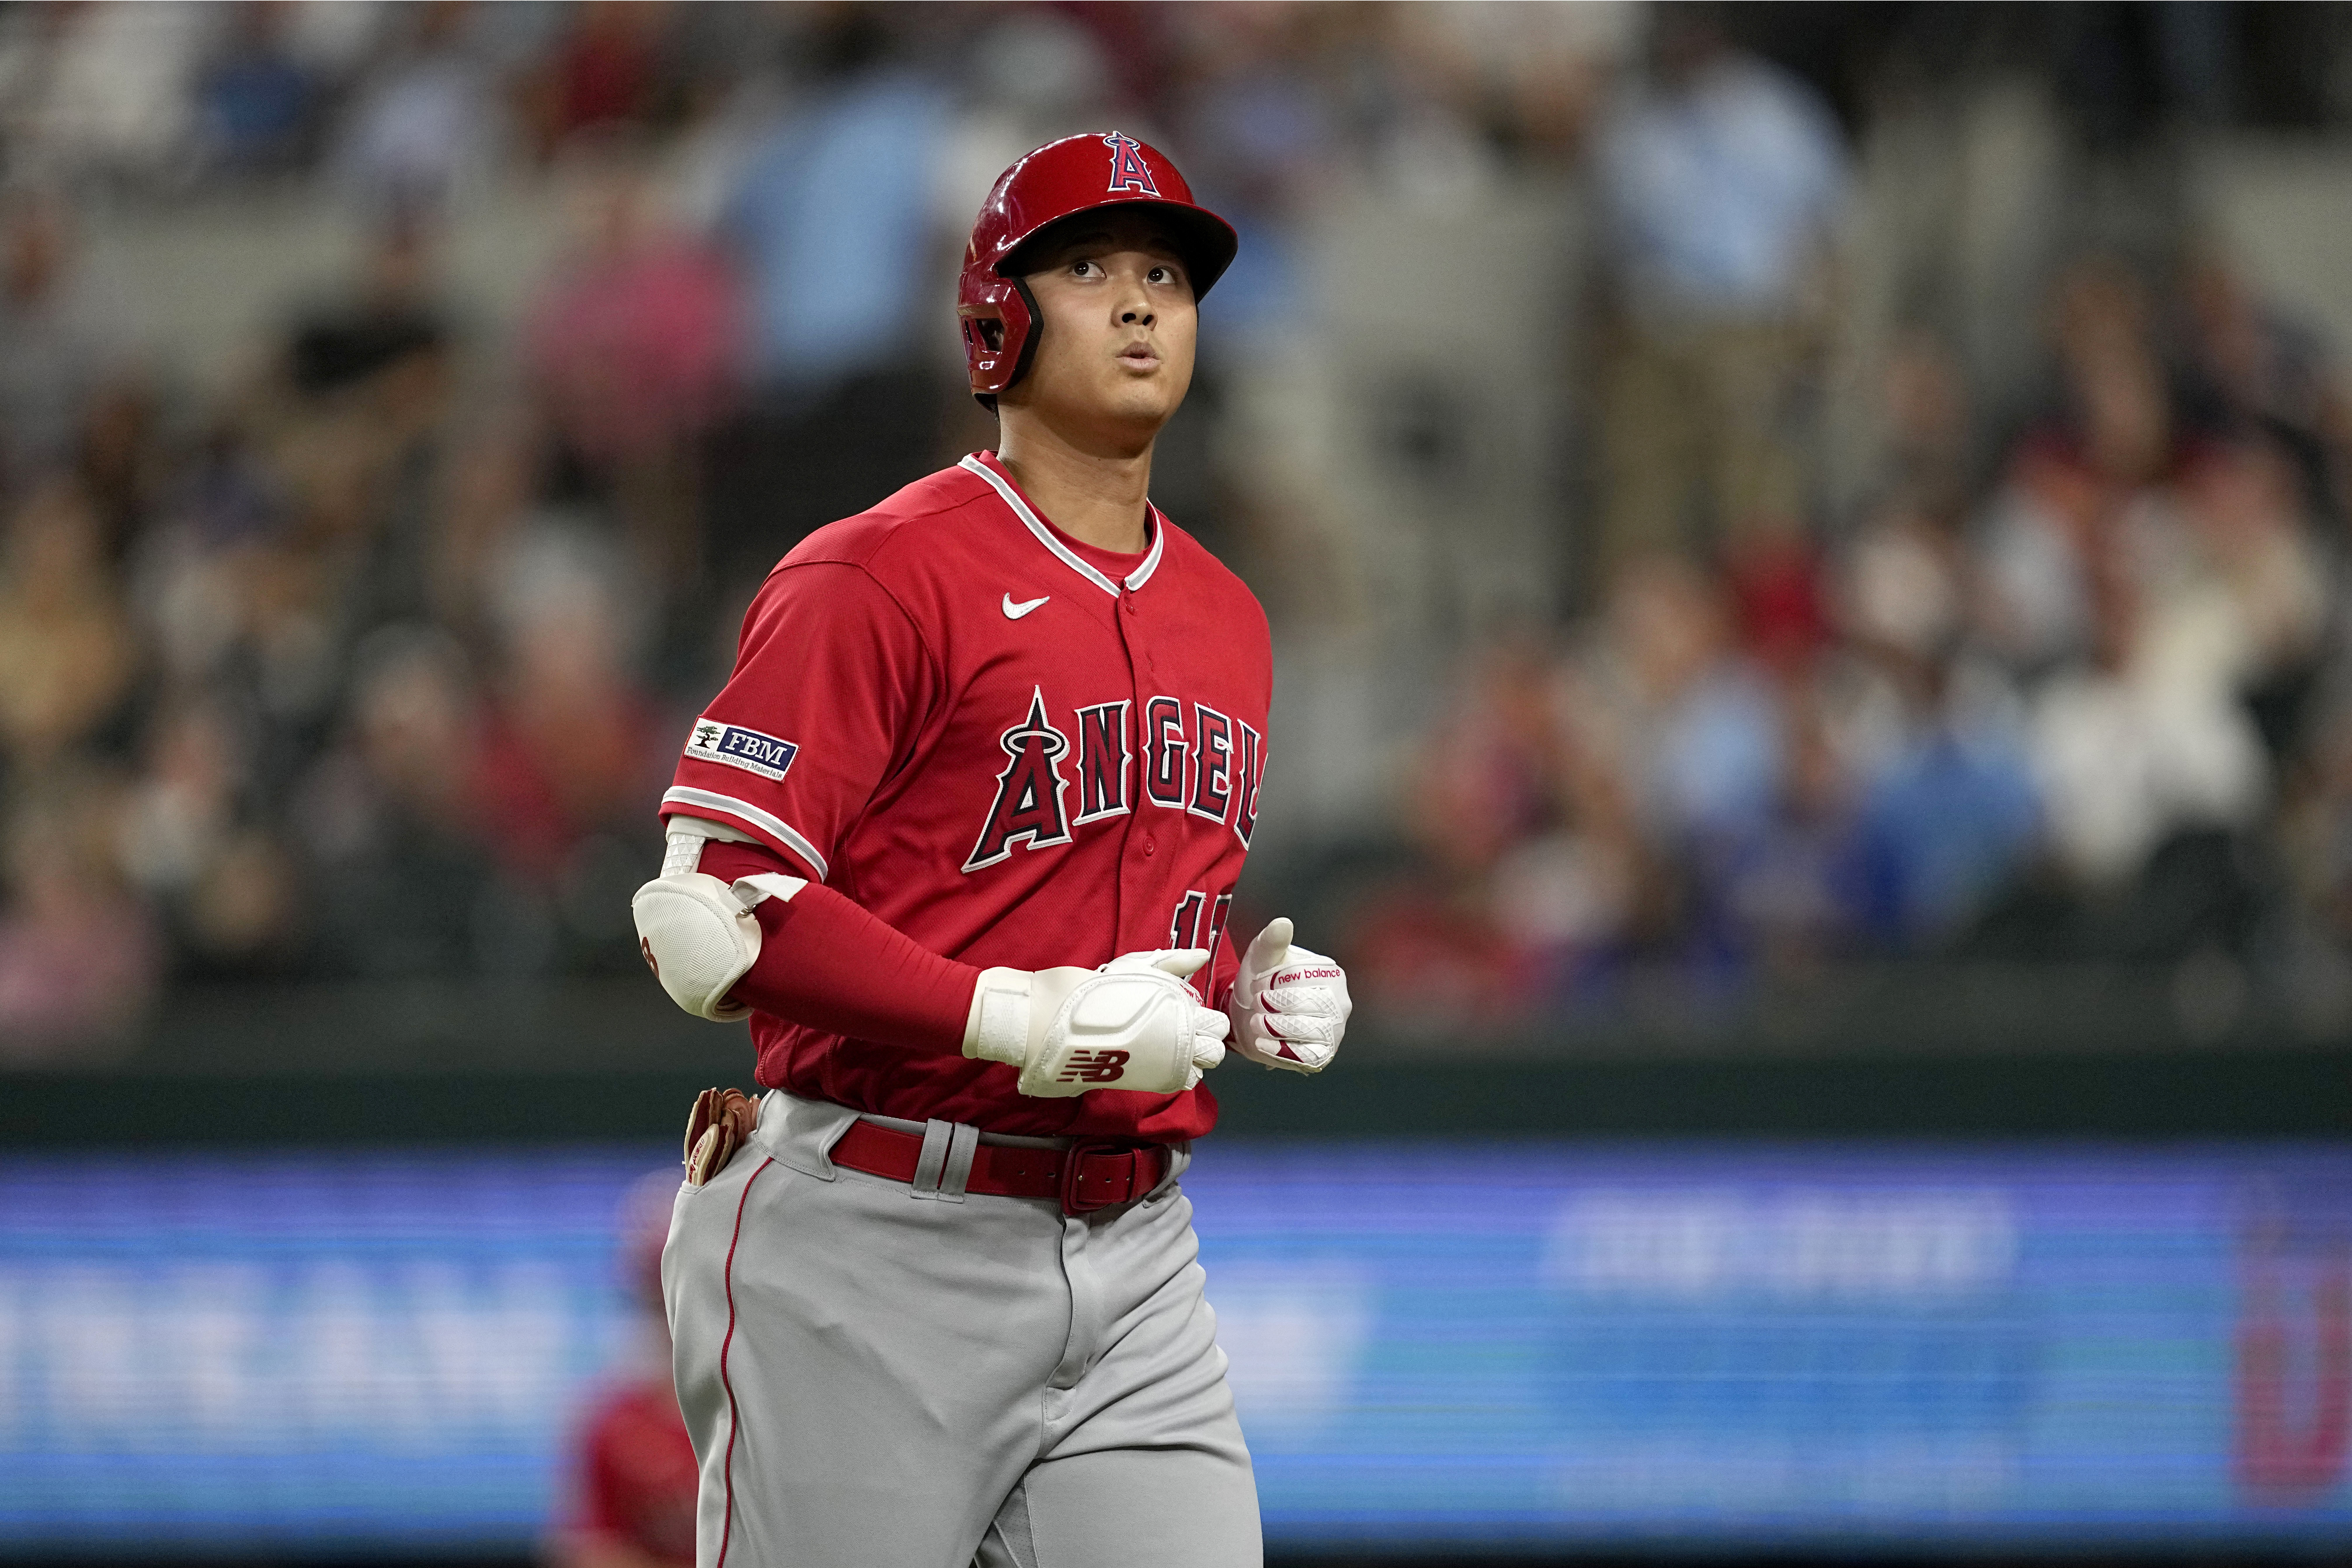 Shohei Ohtani to miss next pitching start for Angels over arm fatigue